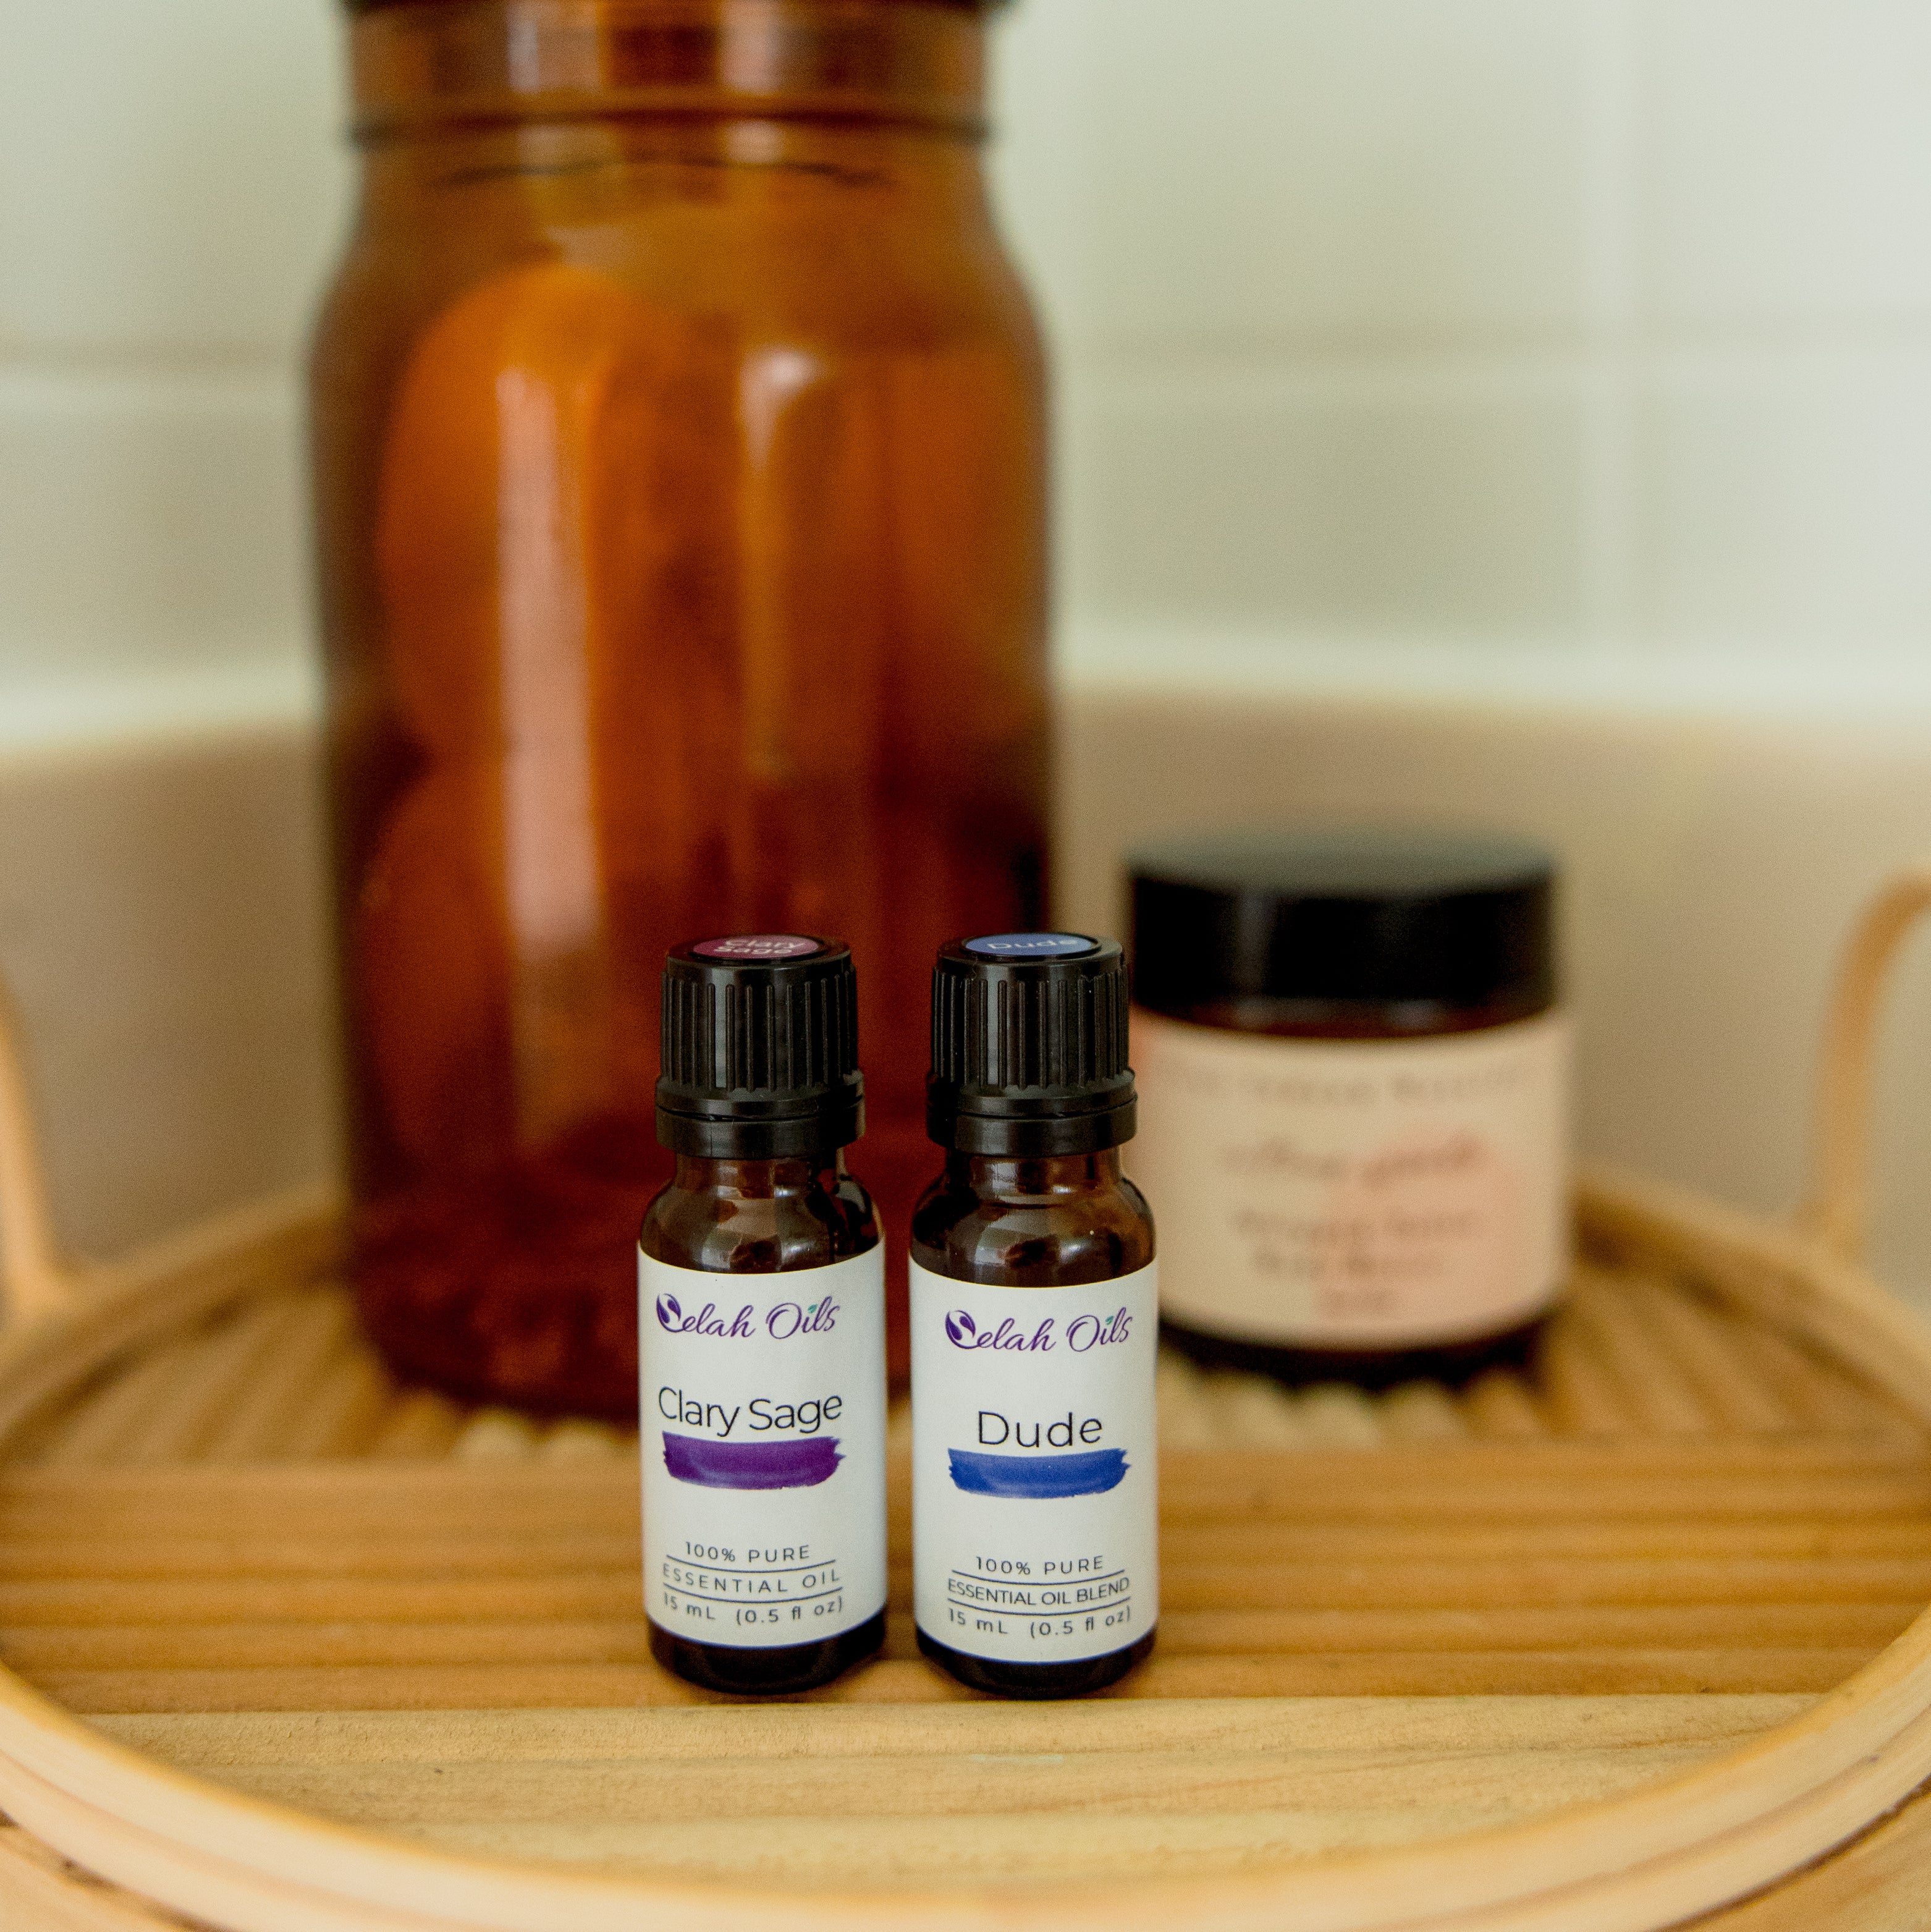 Clary Sage Essential Oil*